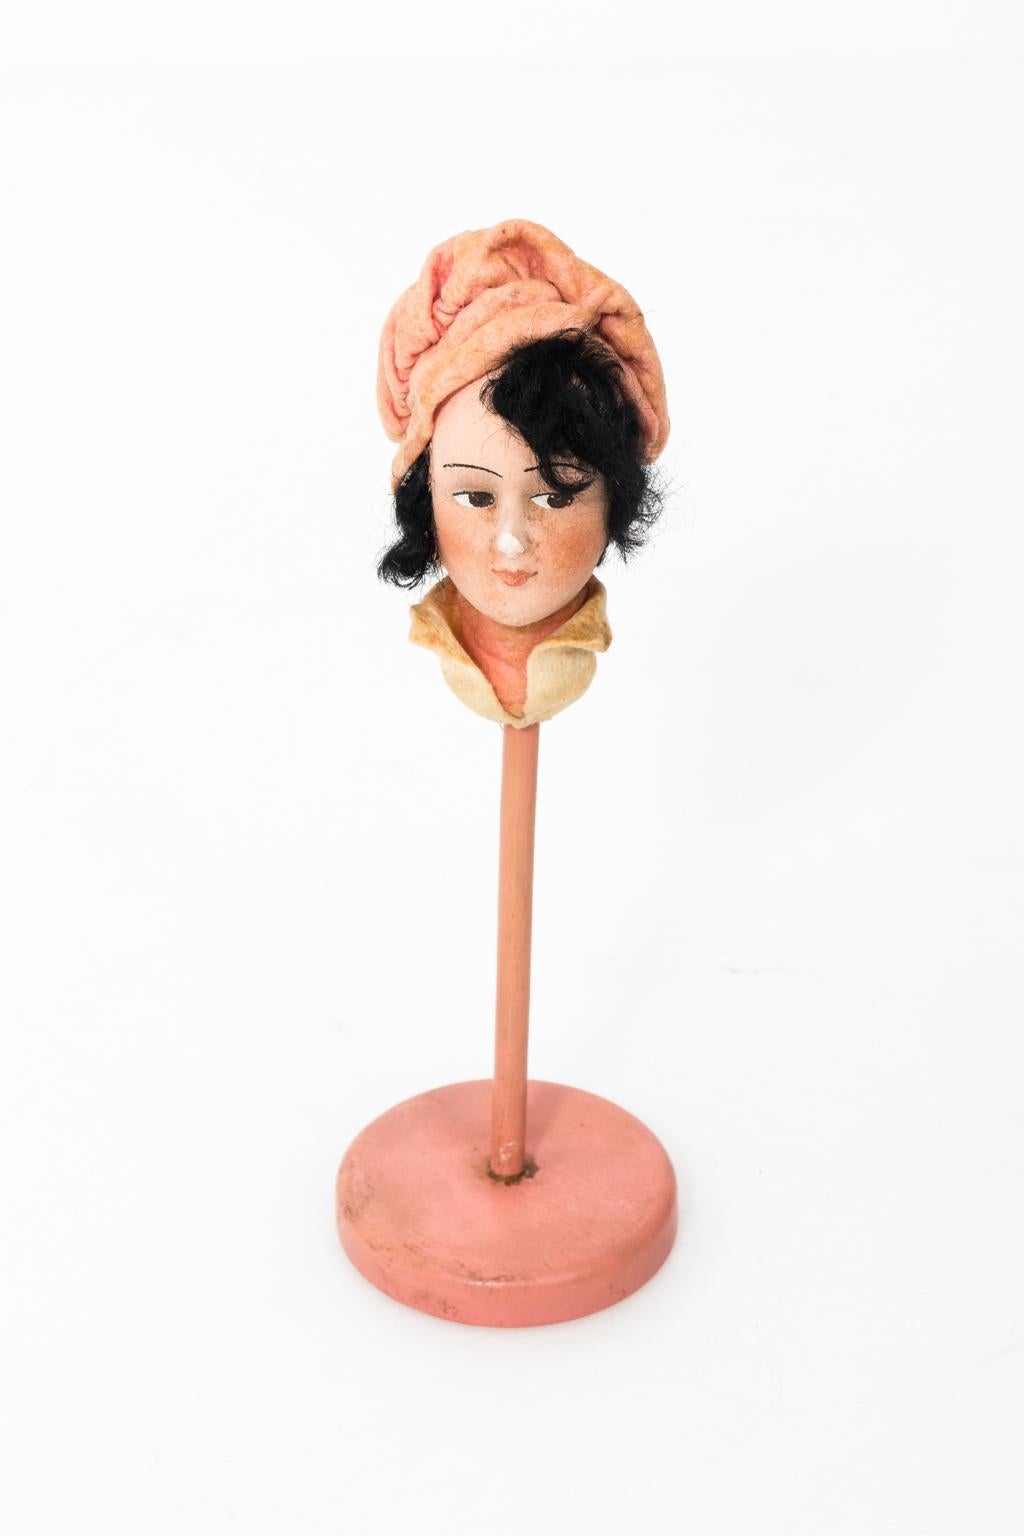 Set of five papier Mache hat stands use in a millinery shop for the display of hats, circa 1920s. Each stand depicts a unique figure in flapper style dress and sizes vary from 9.00 Inches to 13.00 Inches height. Please note of wear consistent with